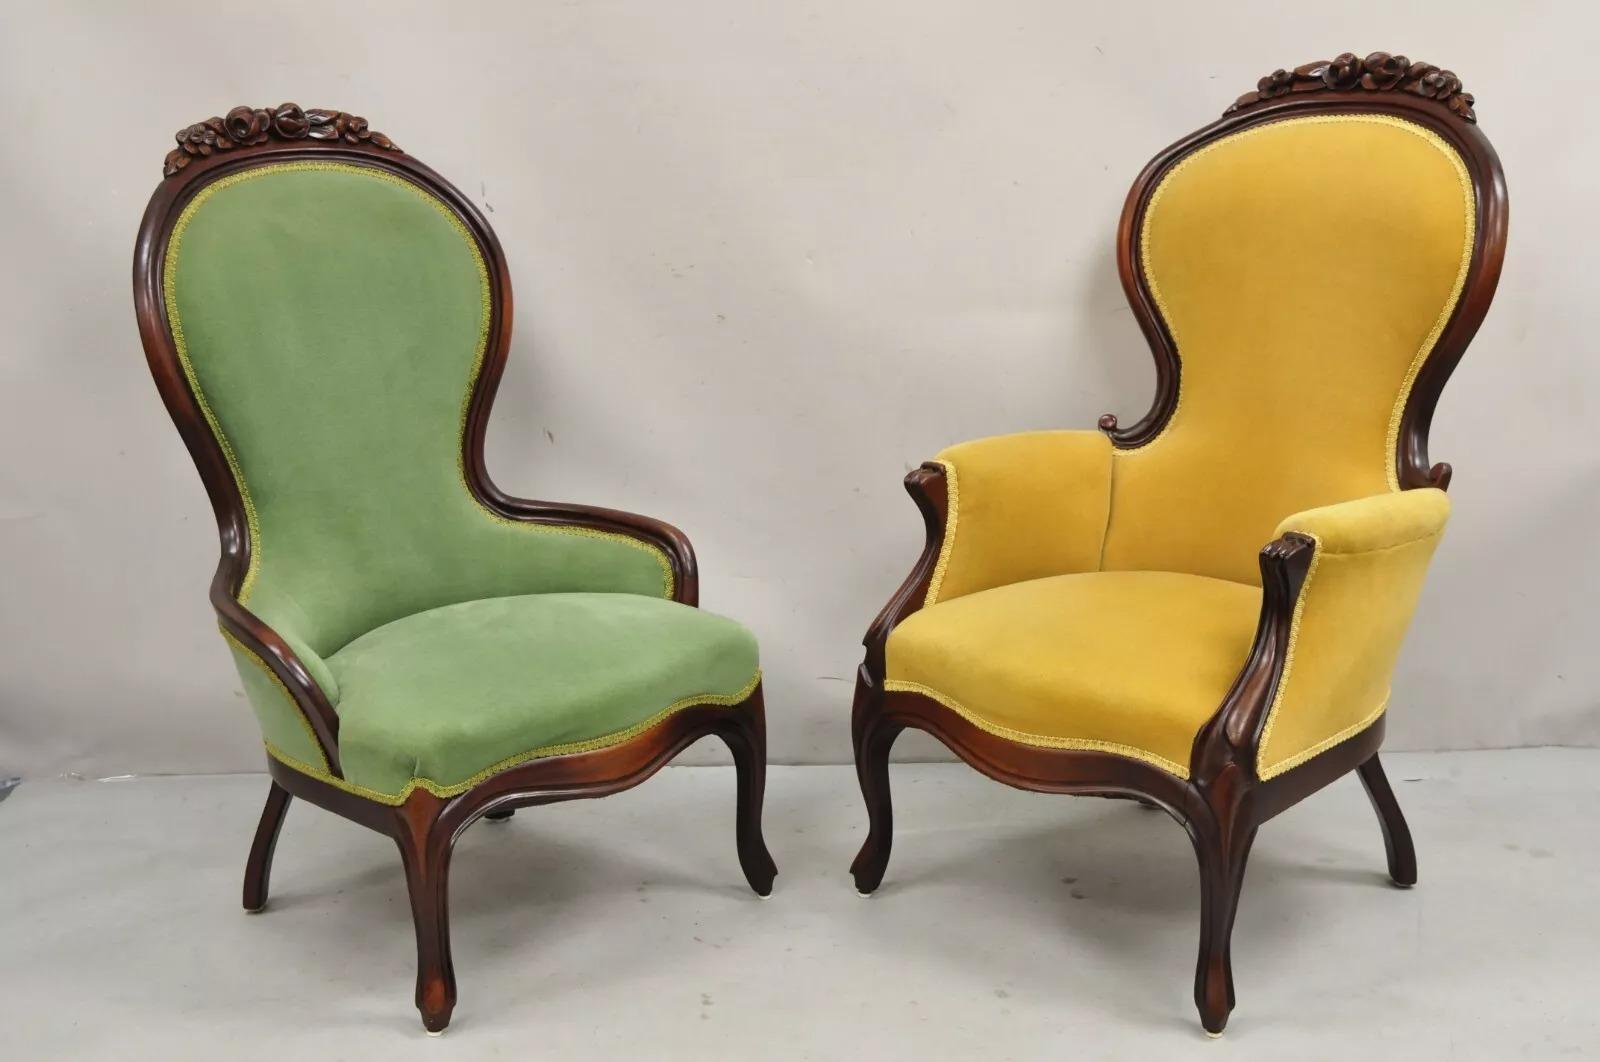 Vintage Victorian Style Green and Yellow His and Hers Rose Carved Parlor Chairs - a Pair/ Item features  carved cherry wood frames, floral rose carved crests, (1) hip-rest chair and (1) armchair, very nice vintage set. Circa  Mid 20th